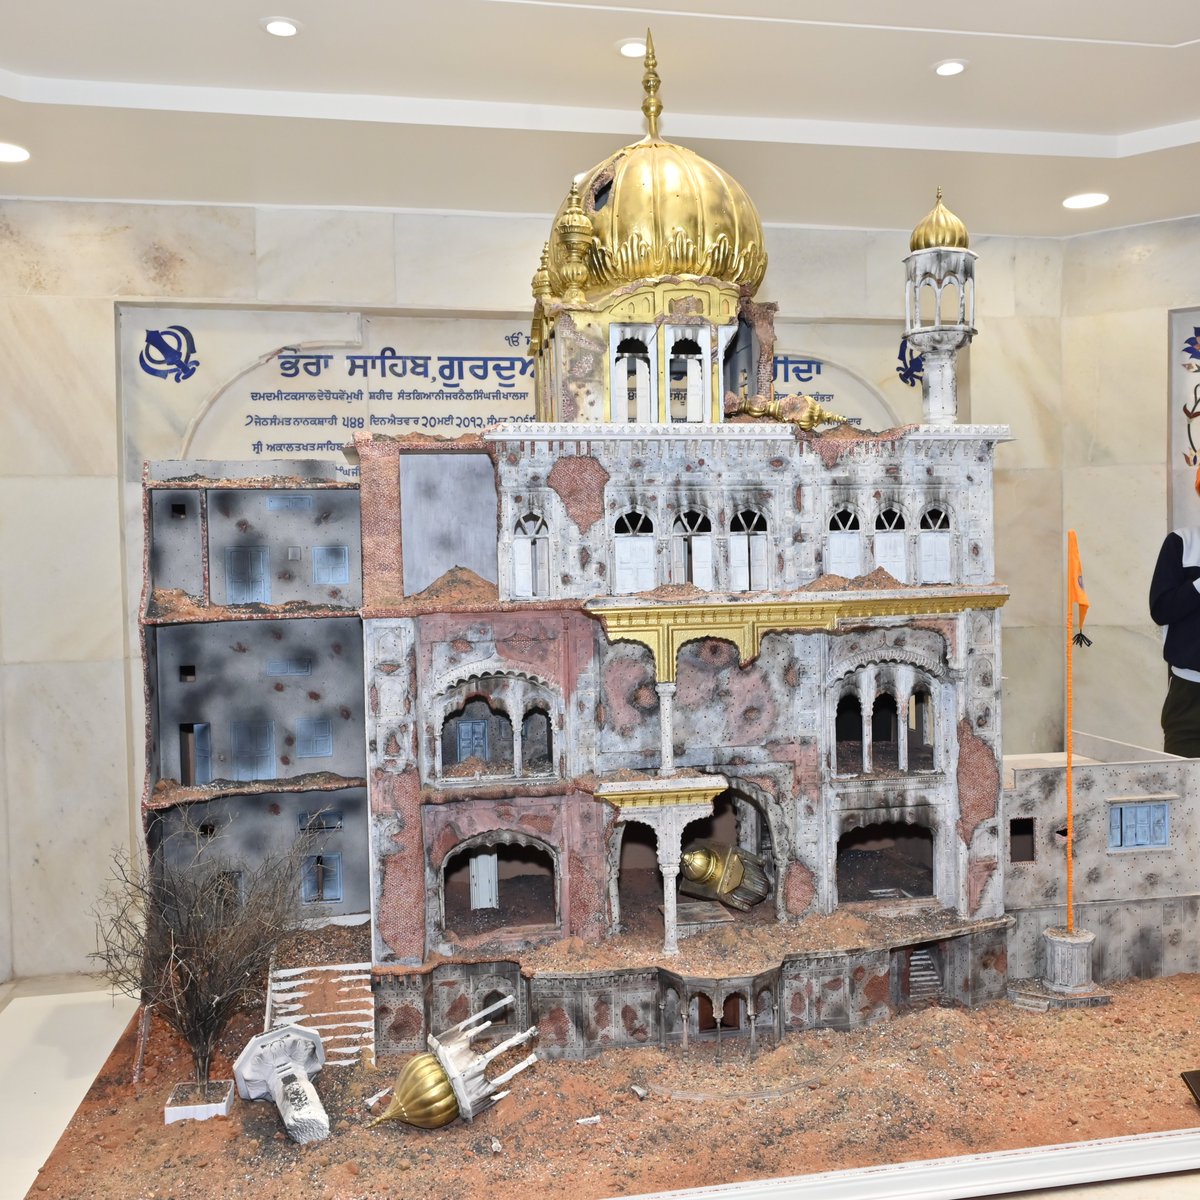 ‘Shaheedi Gallery’ in memory of martyrs of June '84 Ghallughara inaugurated
-Shaheedi Gallery will be a source of inspiration for future generations: Giani Raghbir Singh @J_SriAkalTakht 
-Sikh community can never forget wounds given by government in 1984: Harjinder Singh Dhami